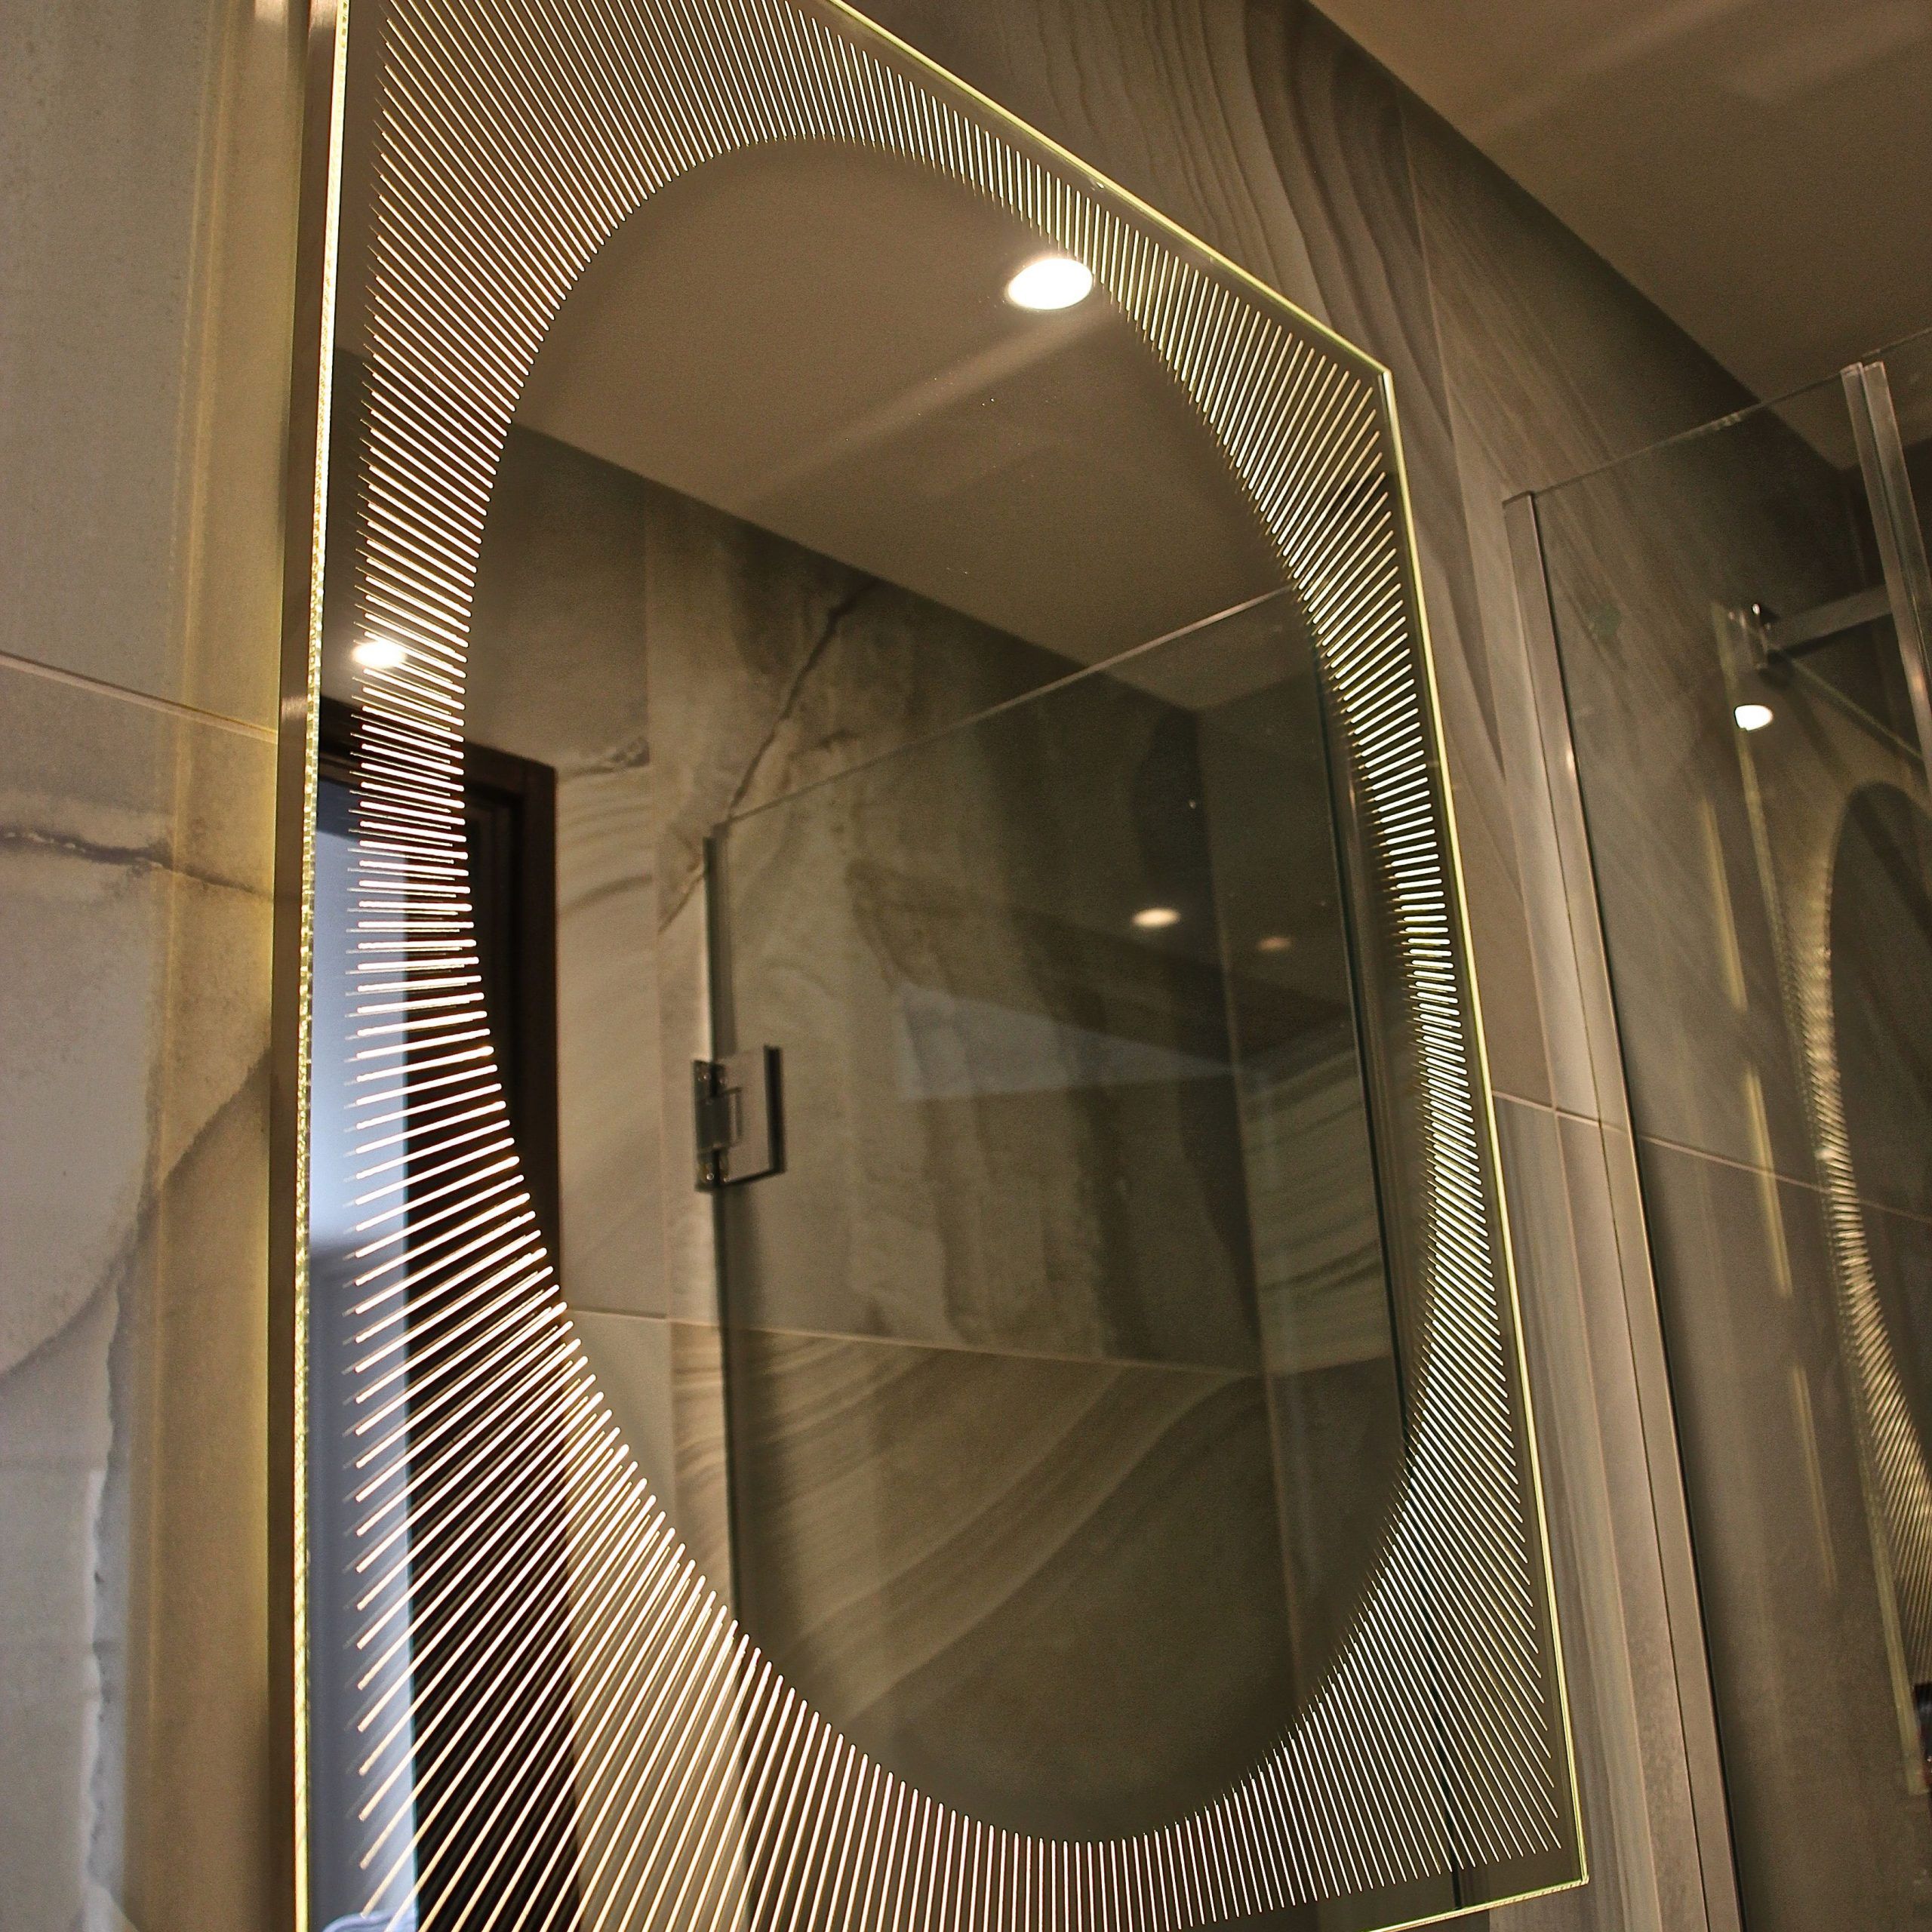 Pin On Back Illuminated Bathroom Mirrors Pertaining To Rounded Cut Edge Wall Mirrors (View 6 of 15)